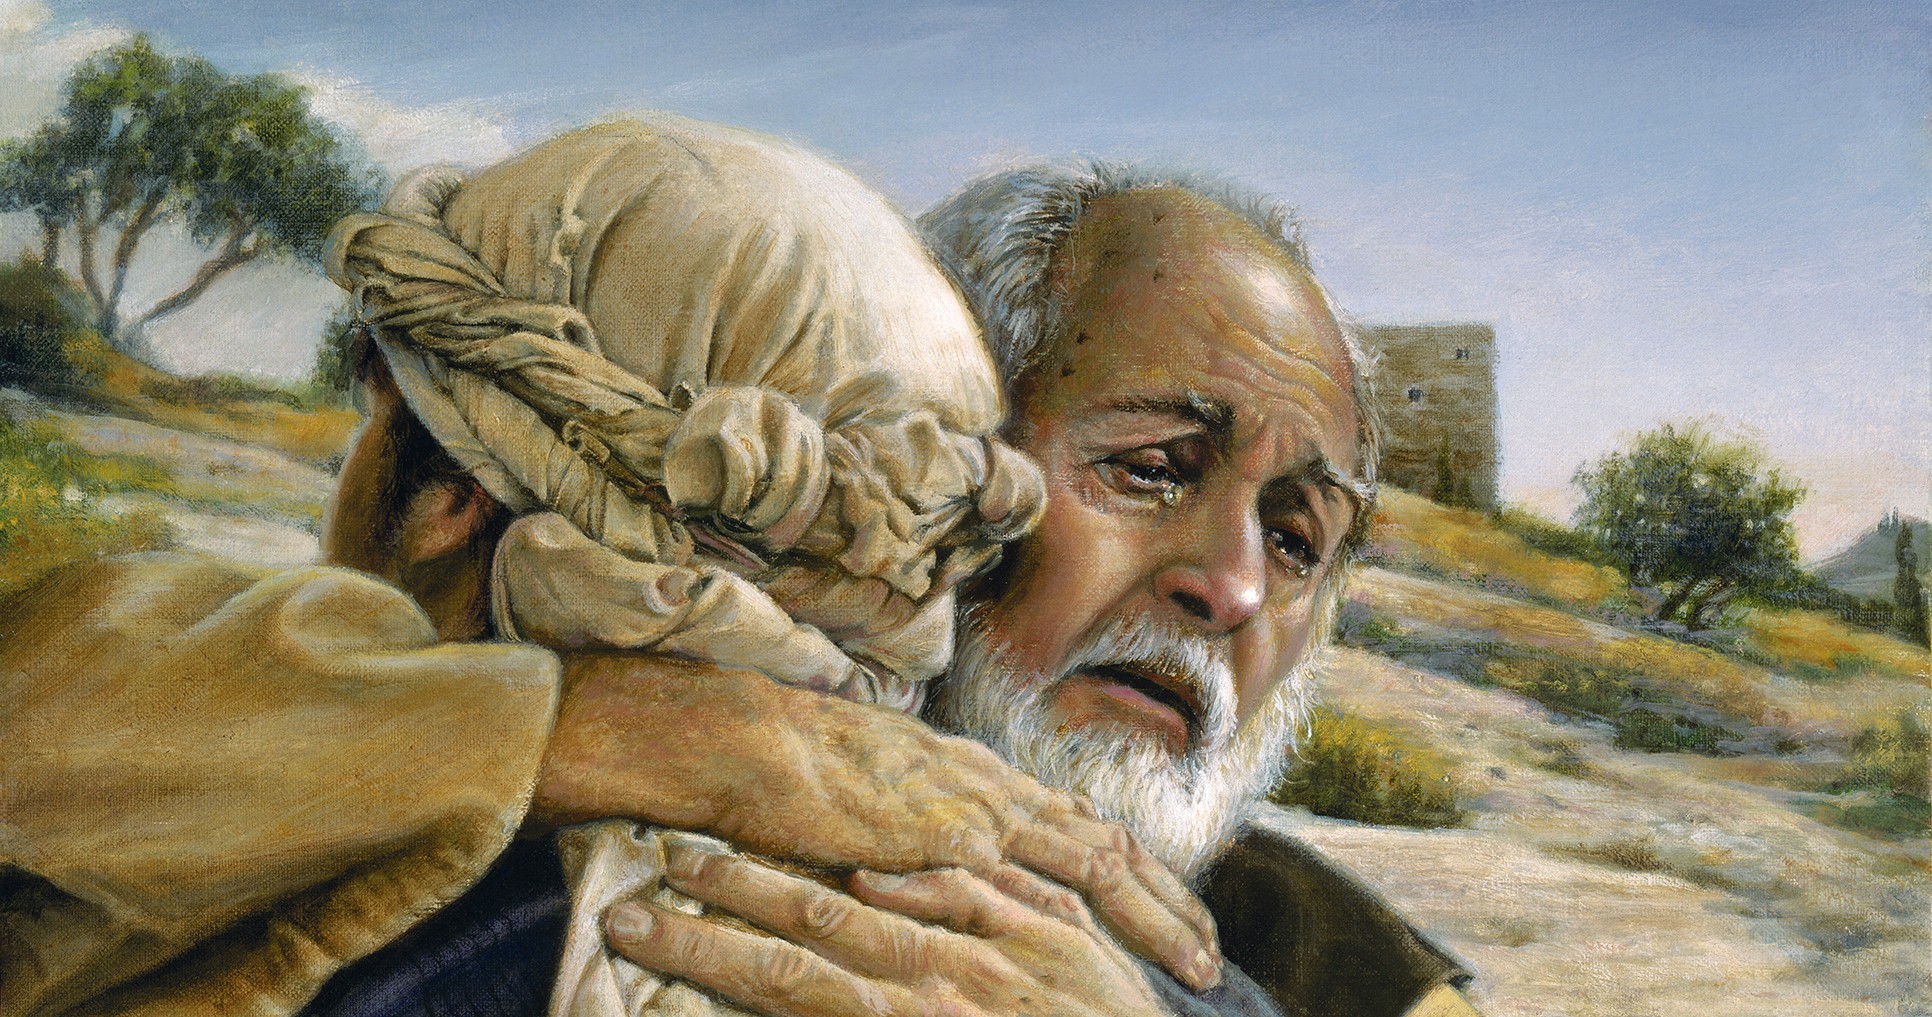 A father hugging his prodigal son.
altered version